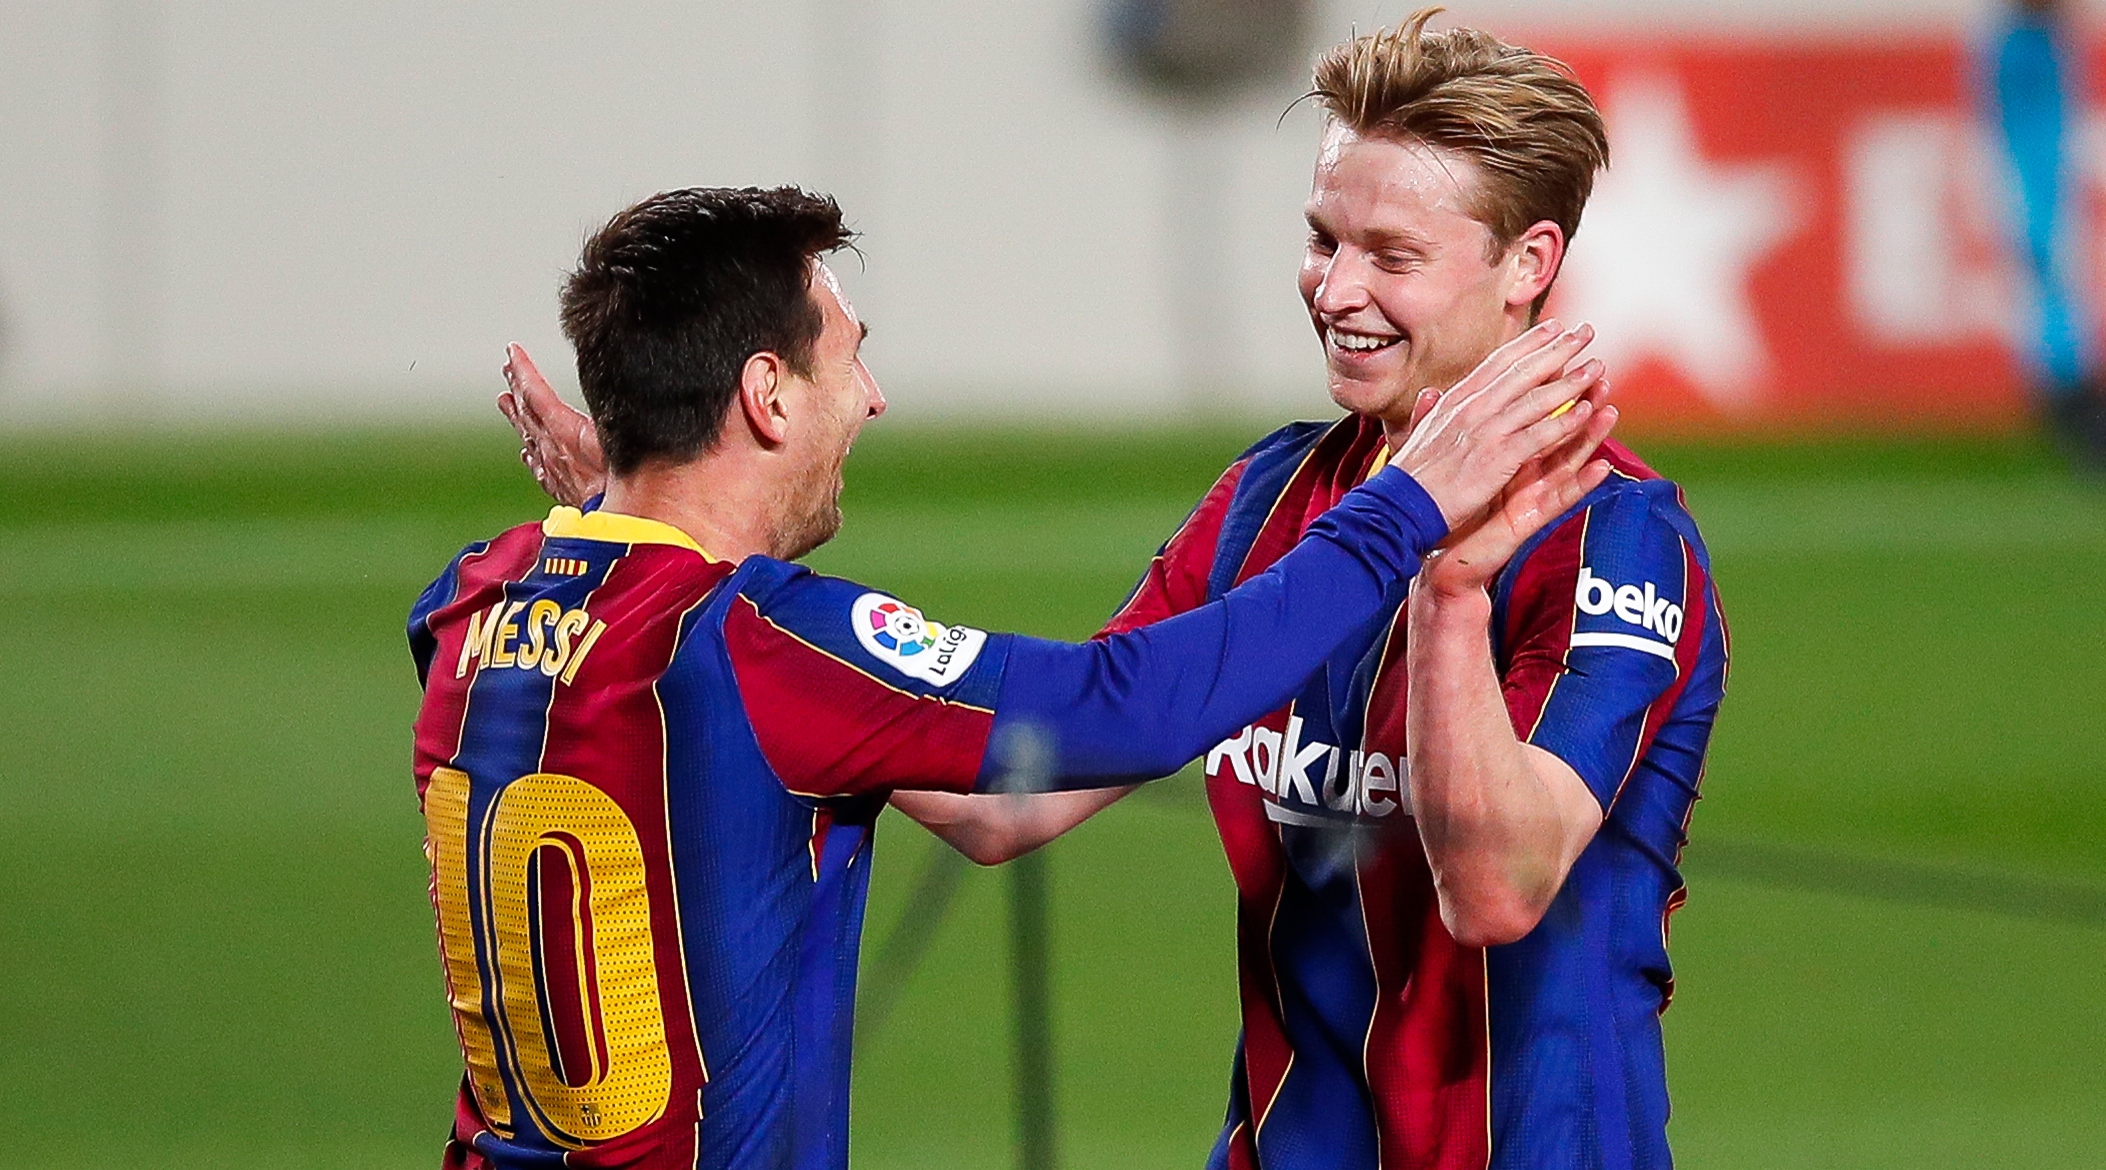 Lionel Messi and Frenkie de Jong of Barcelona celebrate after a goal during the La Liga match between Barcelona and Getafe at the Camp Nou on April 22, 2021 in Barcelona, Catalonia, Spain.